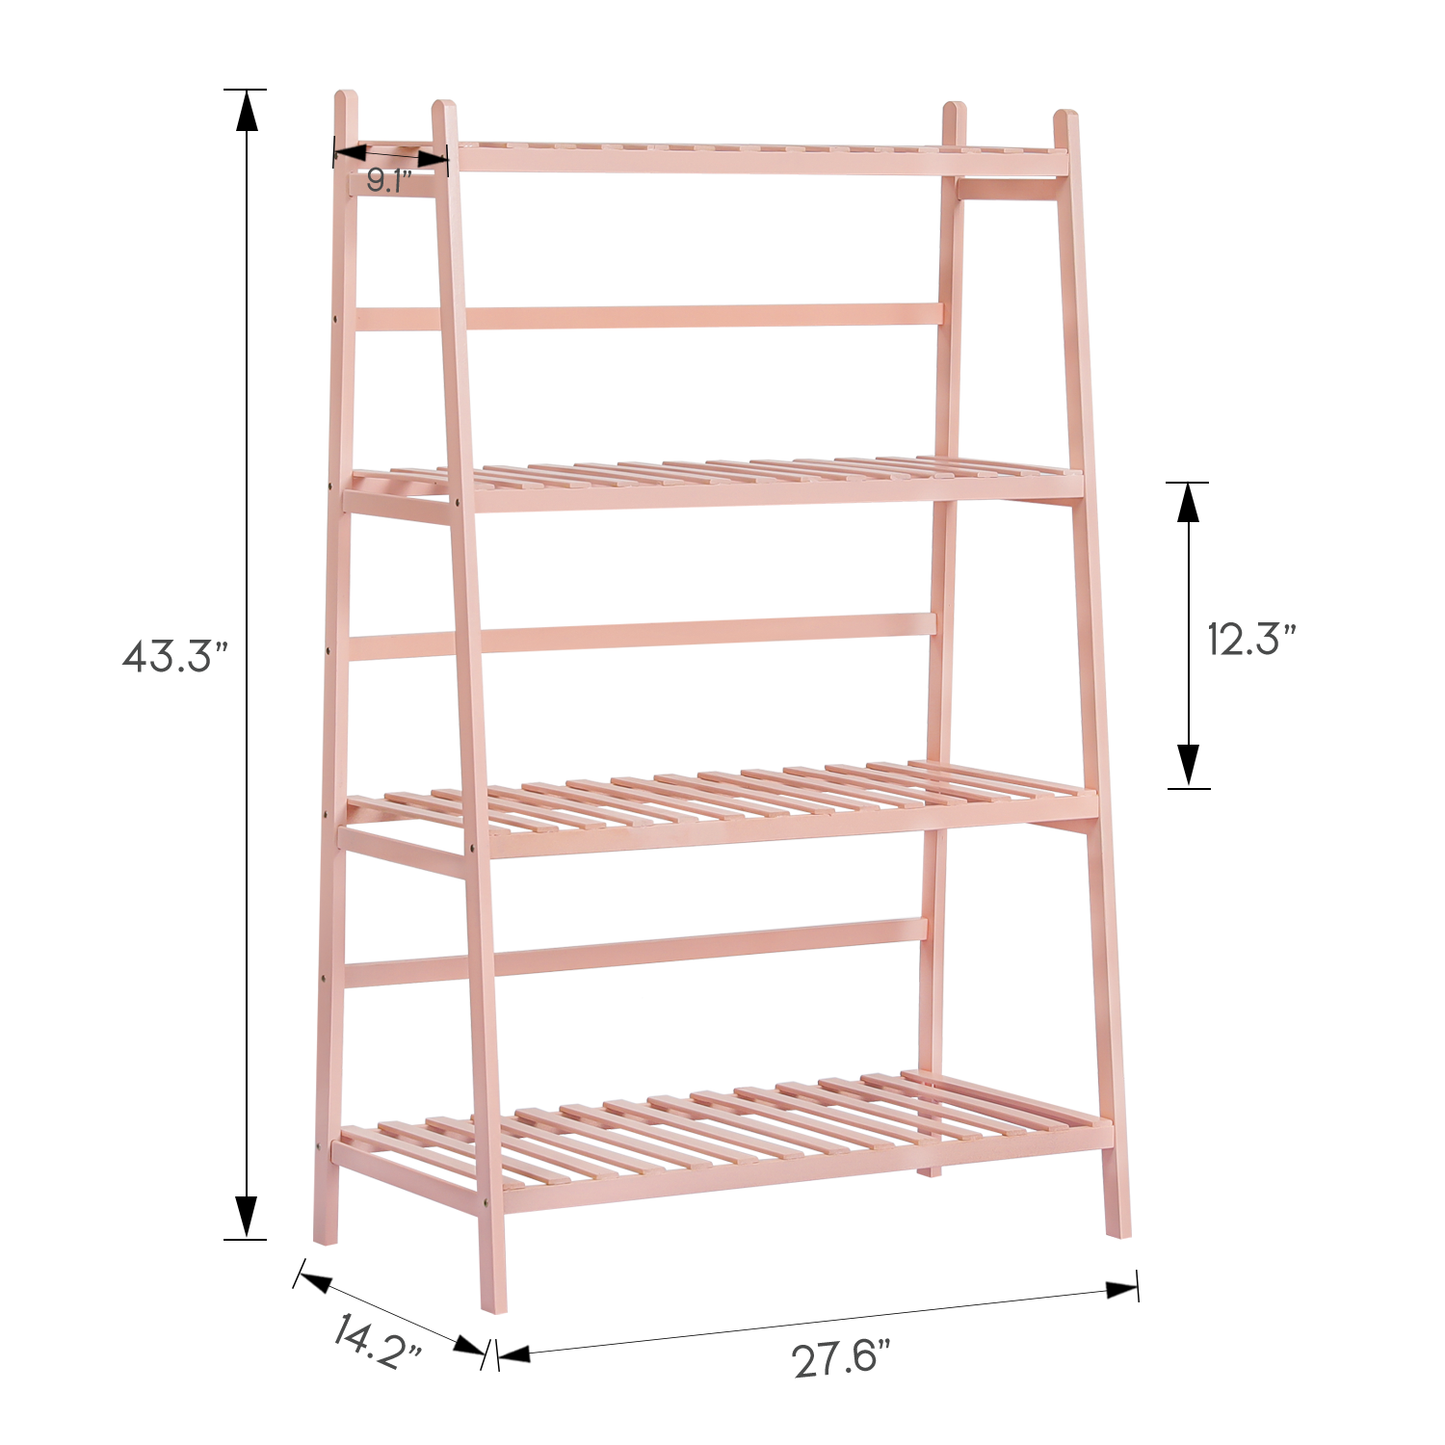 Trapezoid Flower Plant Rack - 4 Tier - Pink